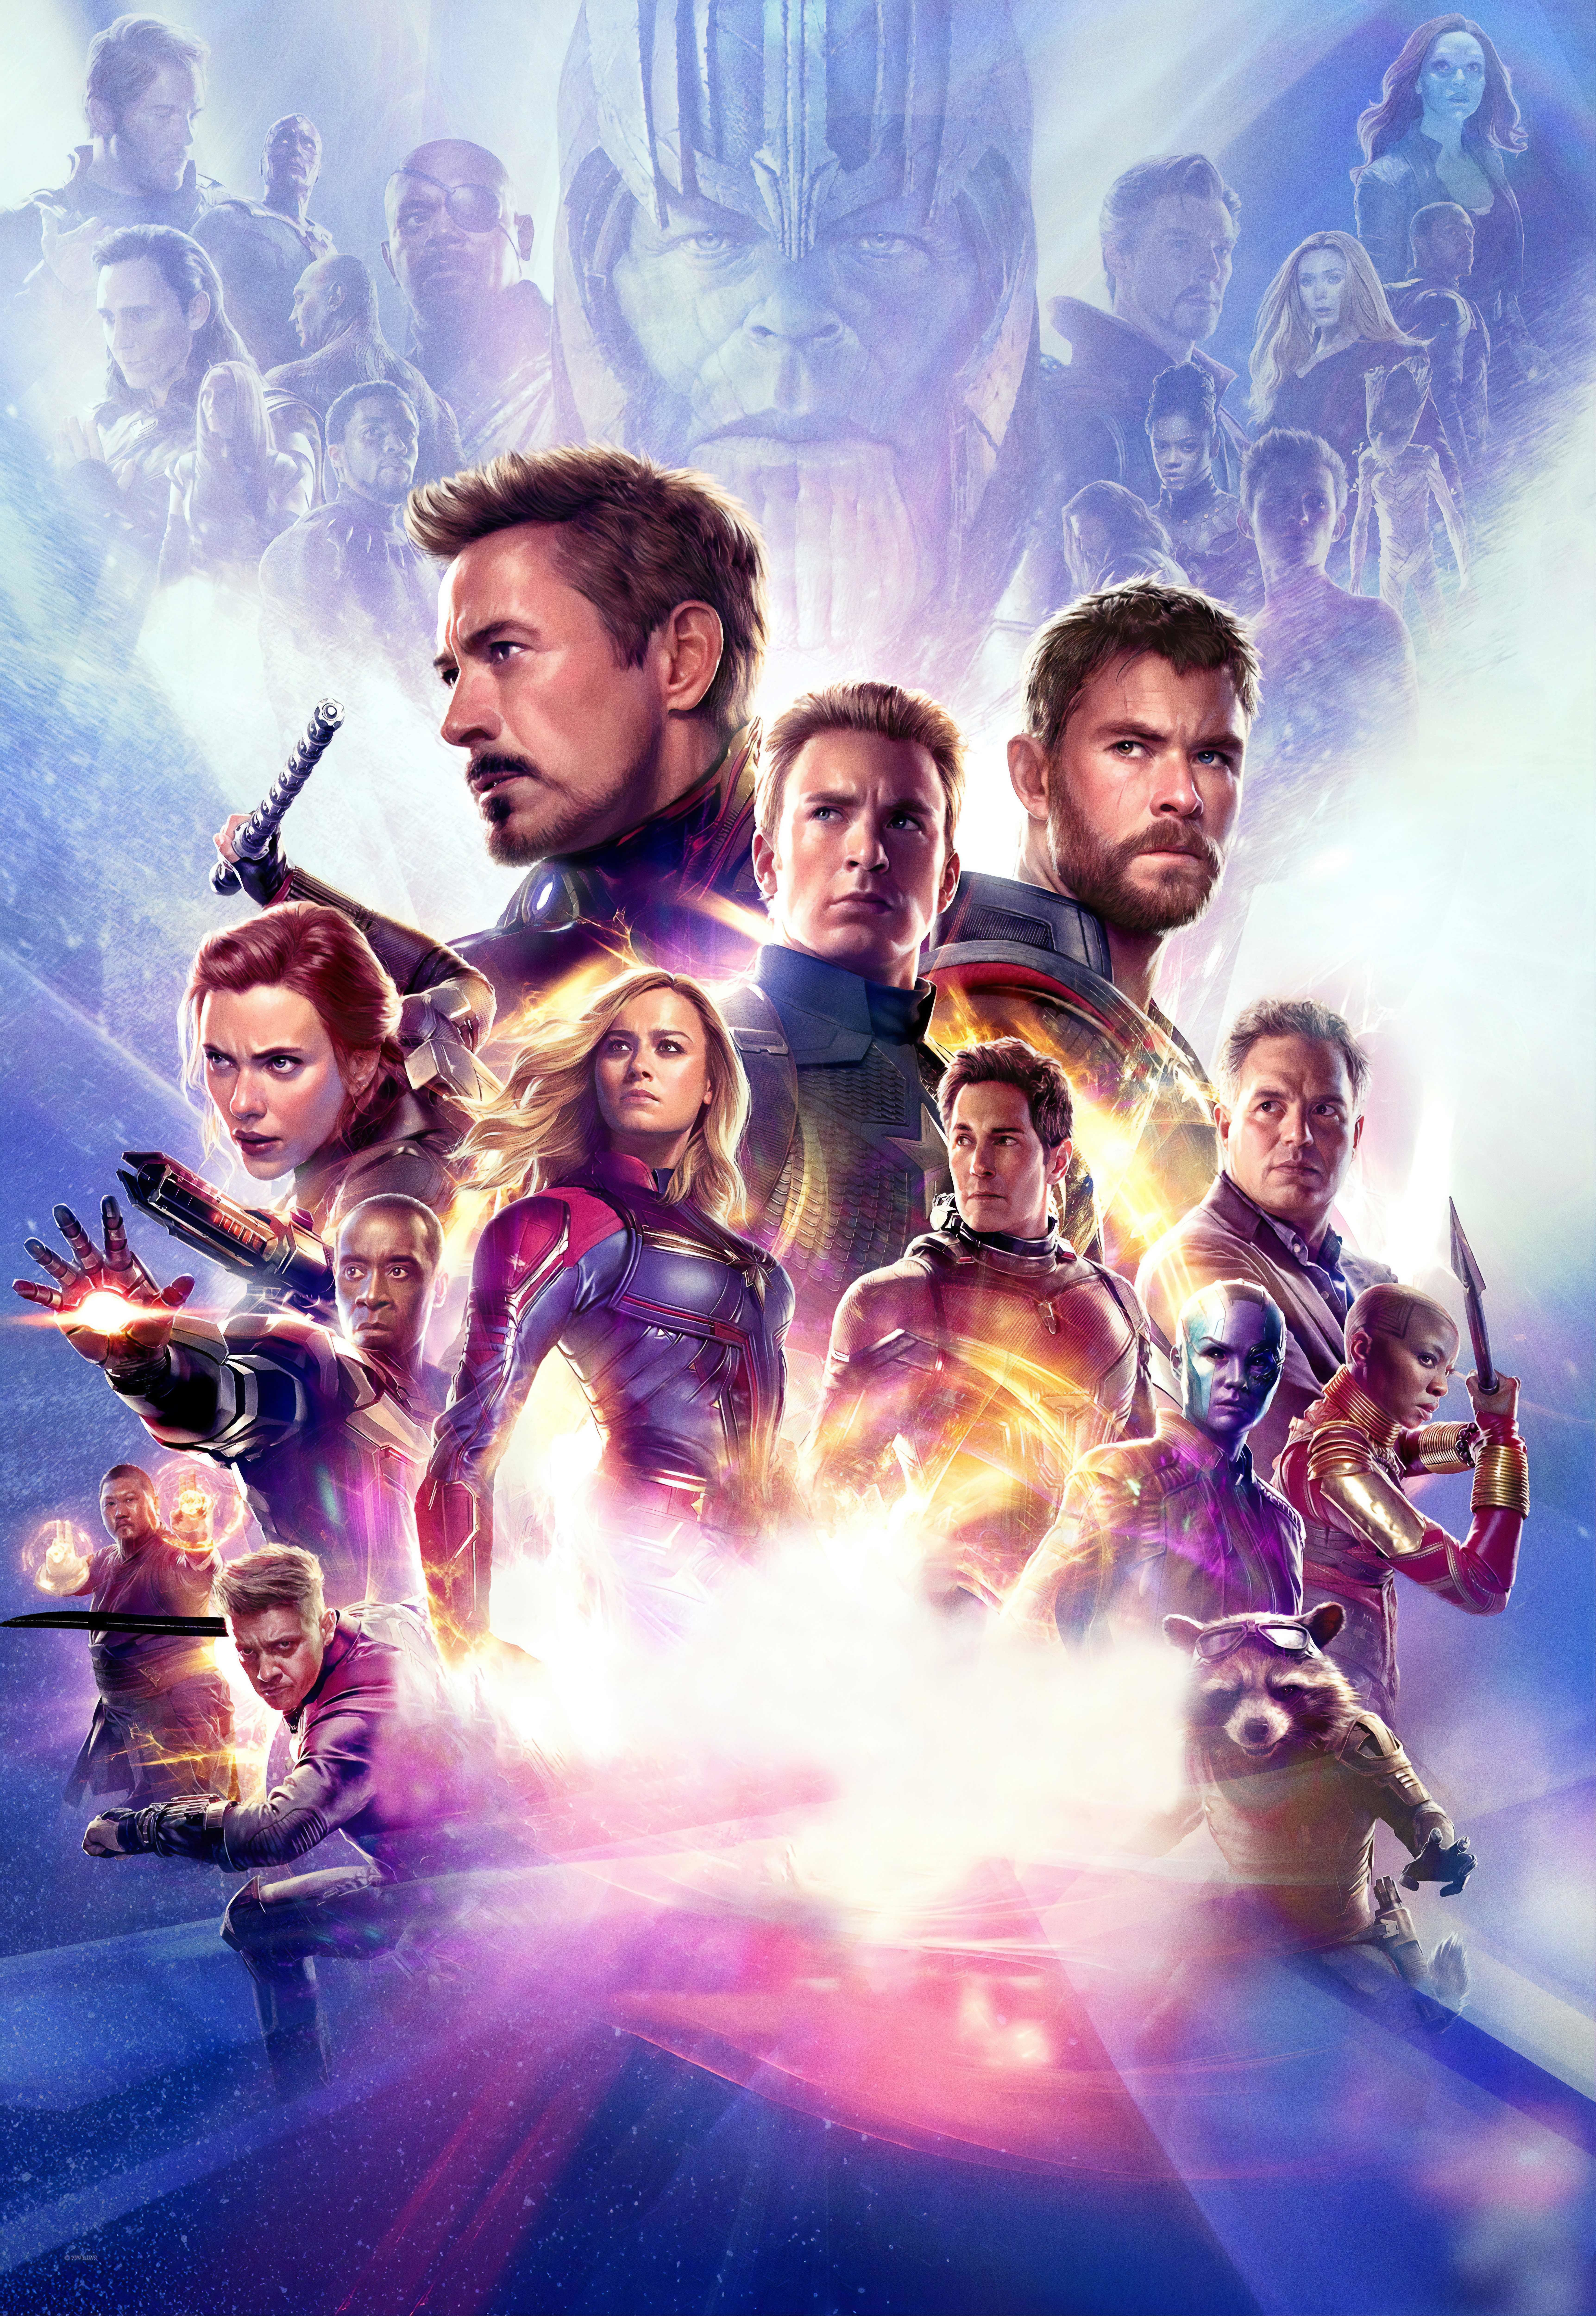 End game avengers release date